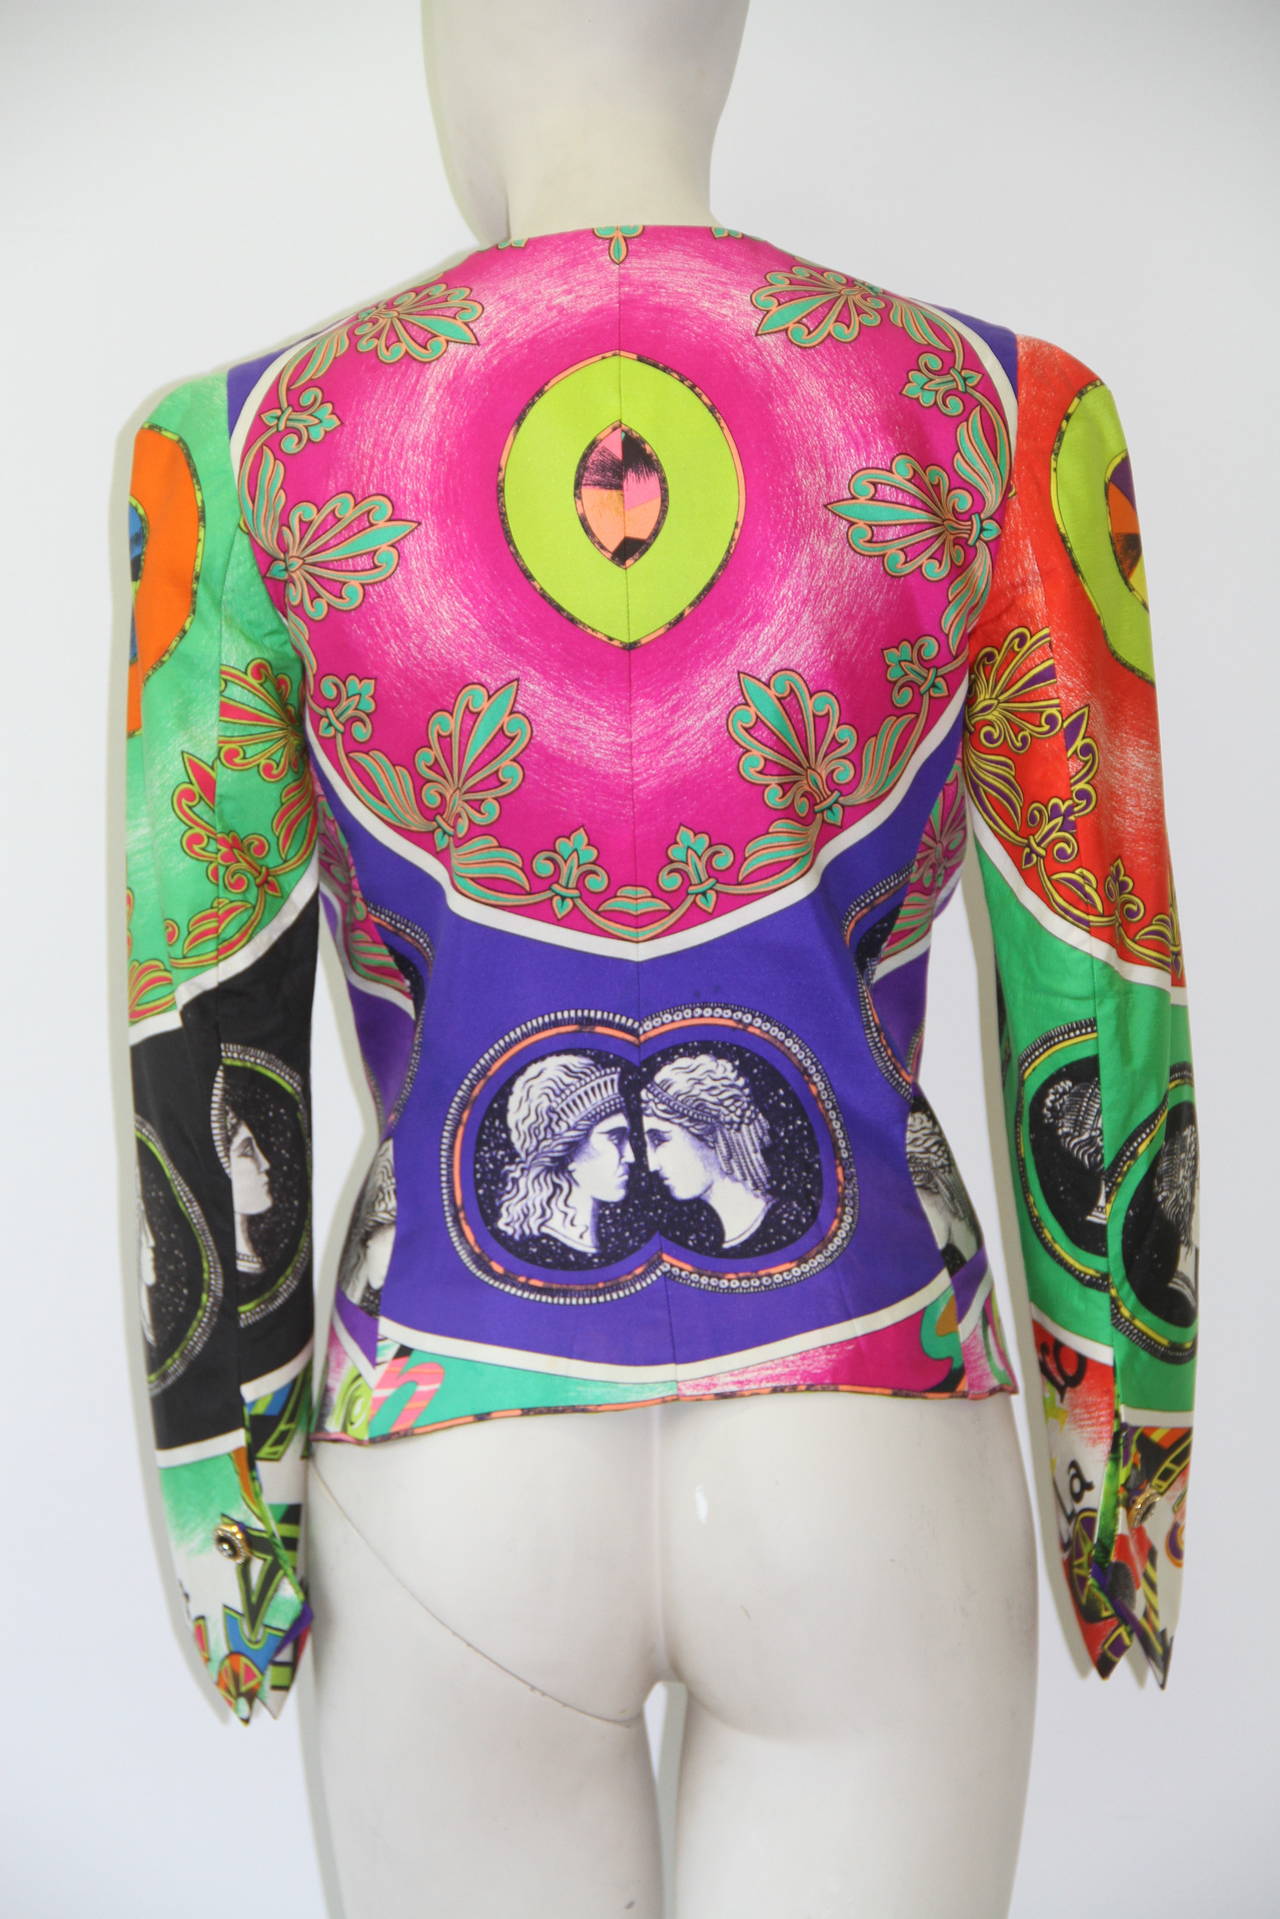 Iconic Gianni Versace silk Pop Art printed jacket from the Spring 1991 Pop Art collection.

The jacket is secured on the front and the cuffs, by a series of gold-tone metal, black jet and paste buttons. The jacket is fully lined in Pop Art printed